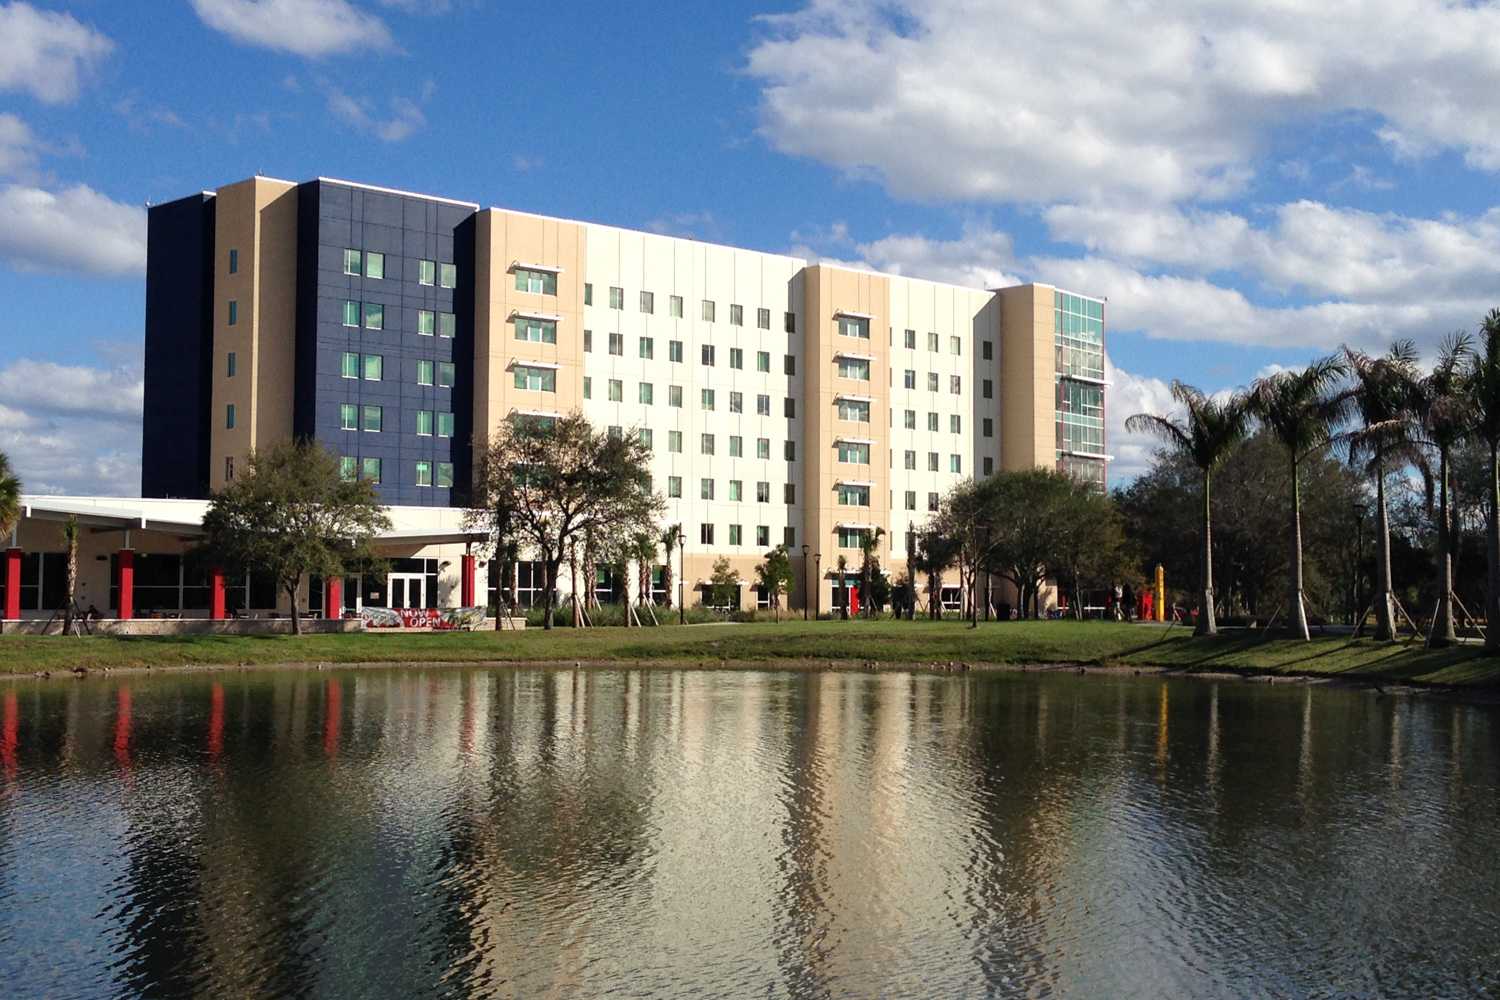 FAU Board of Trustees approves plan to increase 20152016 housing rates